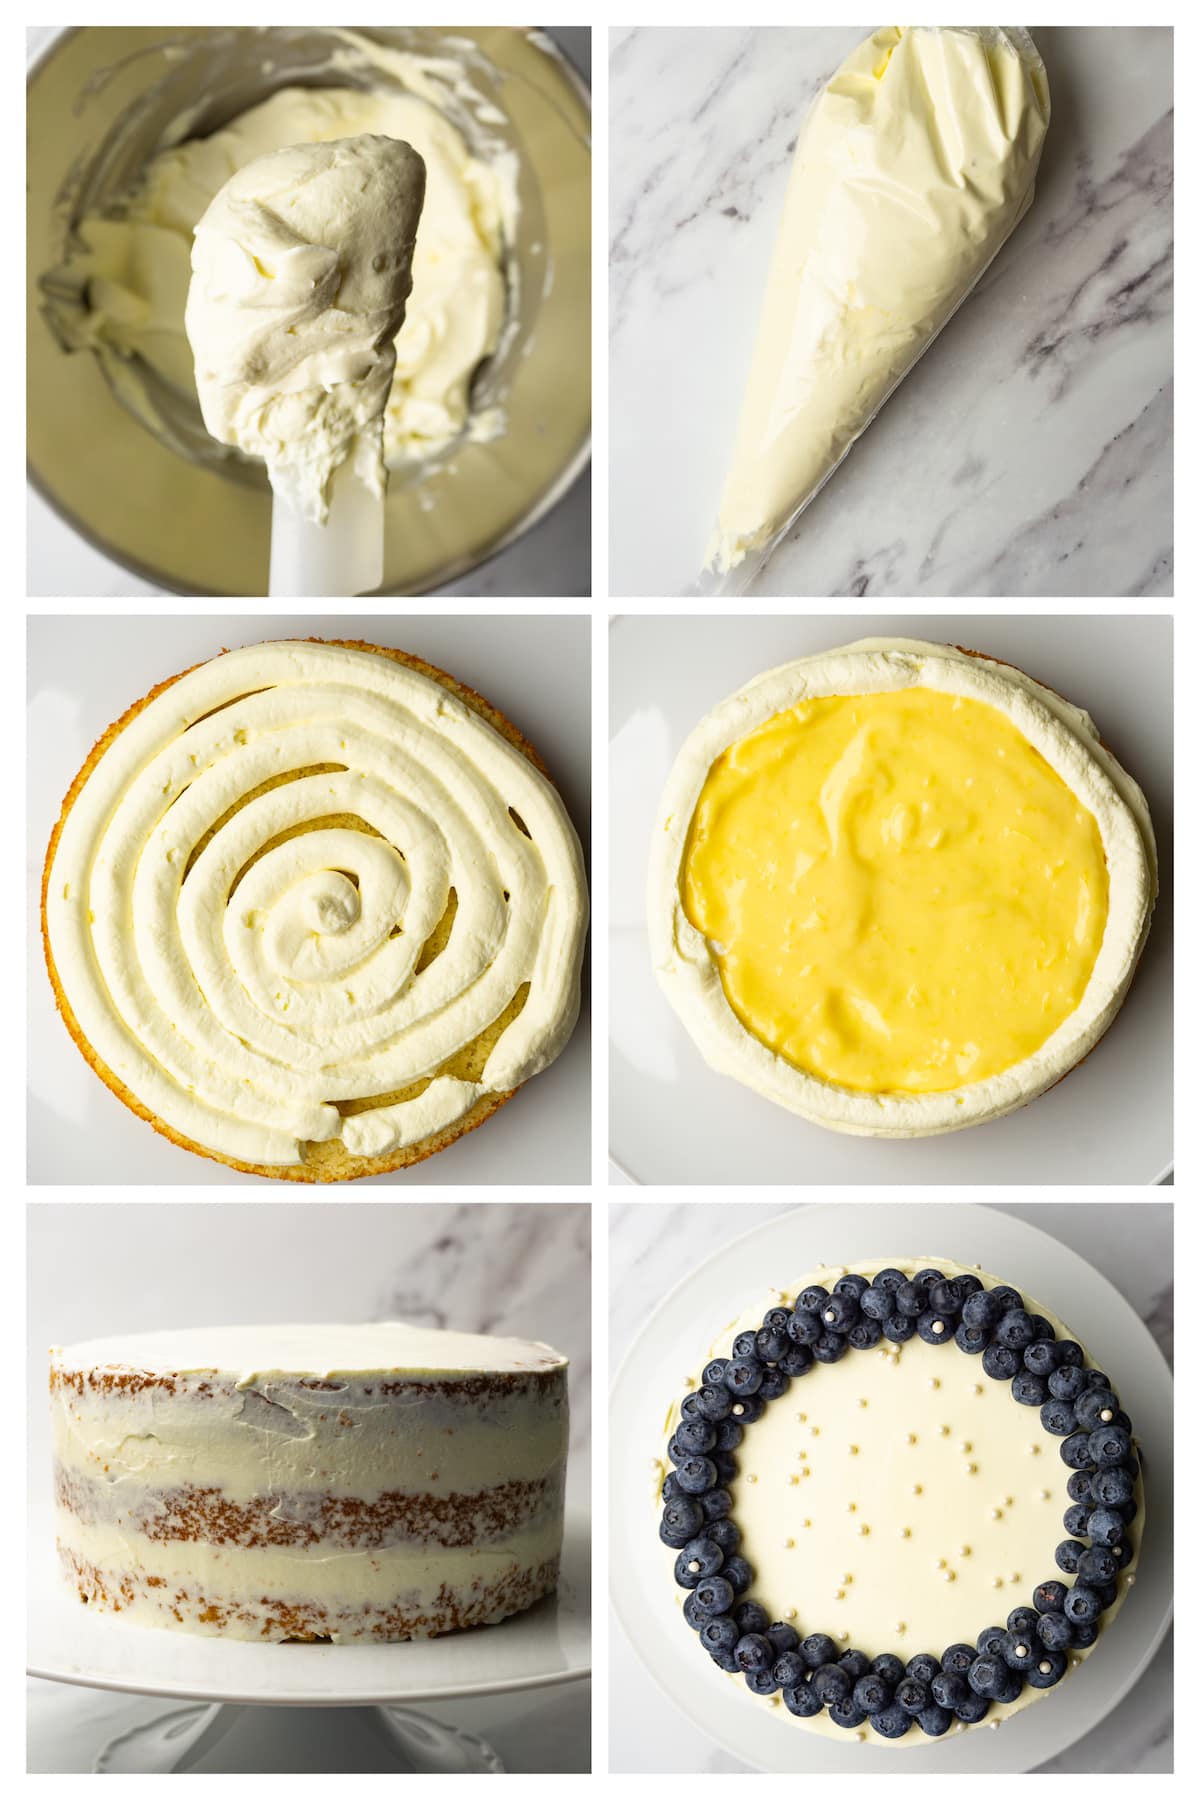 Collage image showing how to assemble lemon curd cake and decorate it with fresh blueberries and sugar purls.